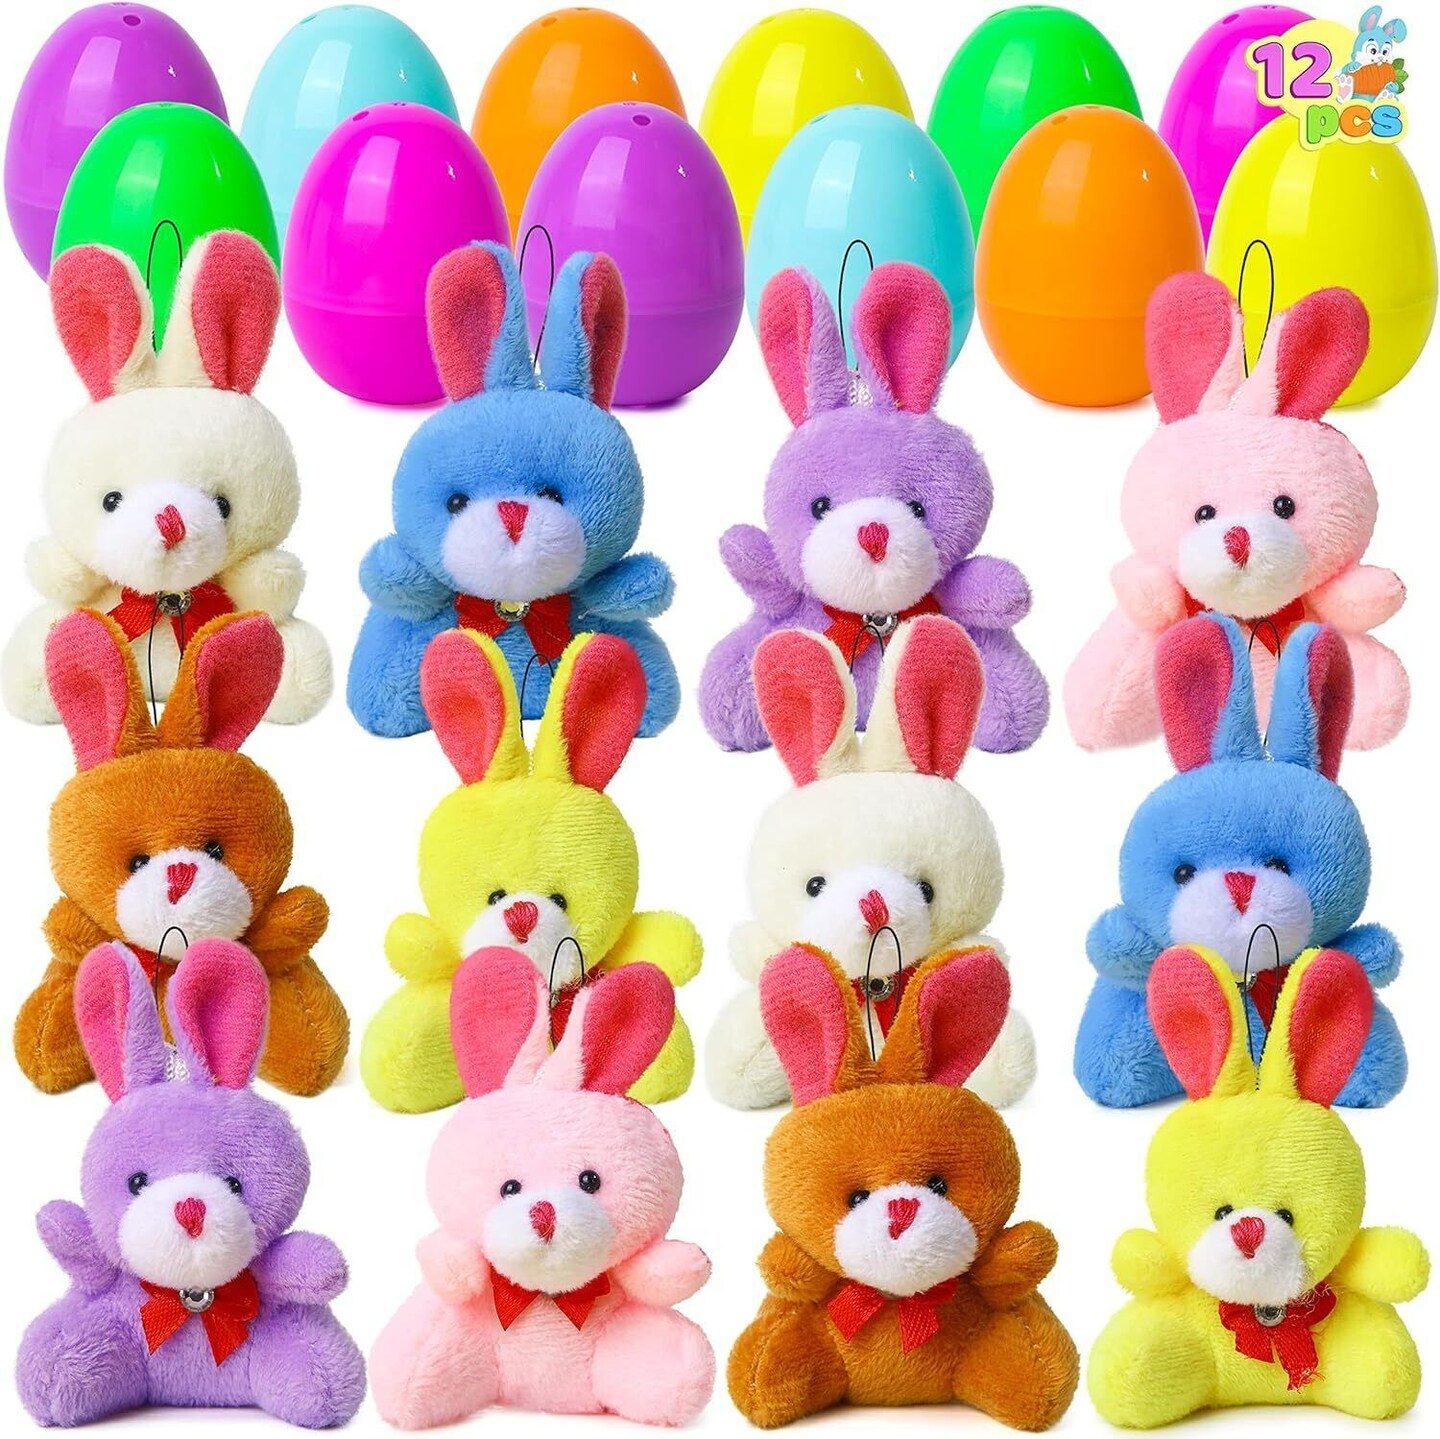 12 Pcs Filled Easter Eggs with Plush Bunny, Bright Colorful Bunnies for Kids